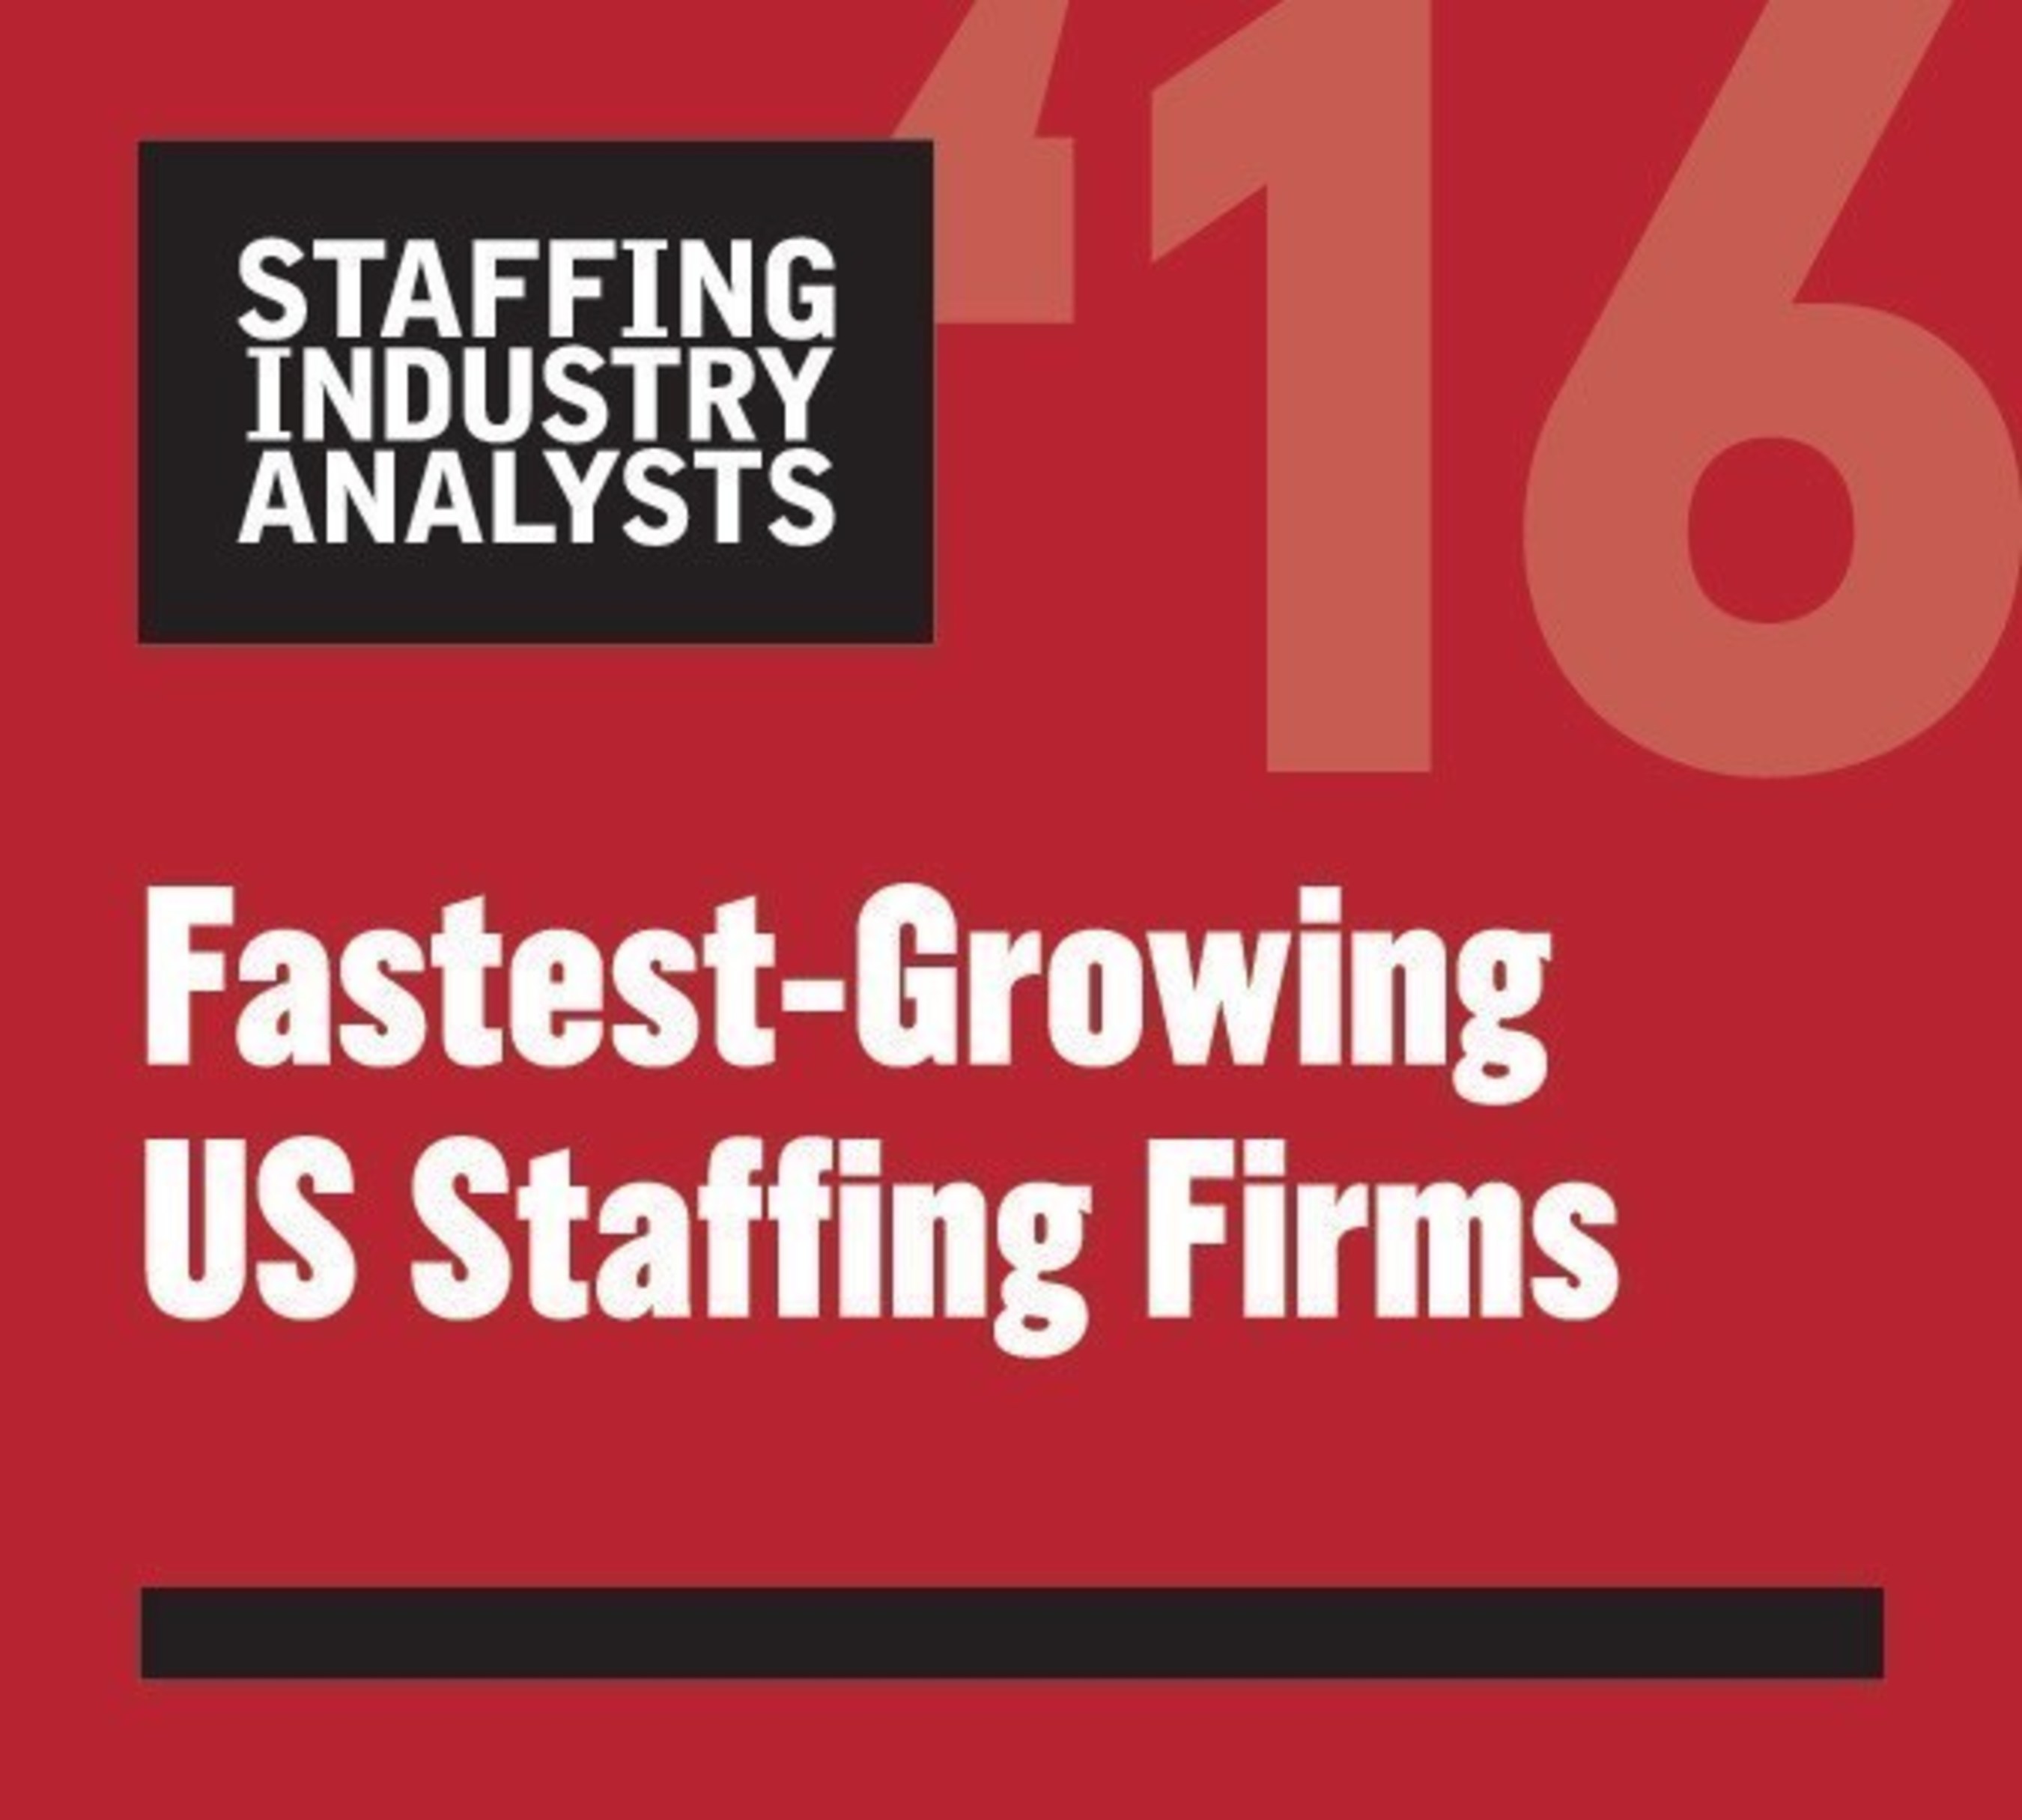 Chicago-based Brilliant(TM) is named on Staffing Industry Analysts 2016 List of Fastest-Growing U.S. Staffing Firms for second year in a row. Learn more at www.brilliantfs.com.